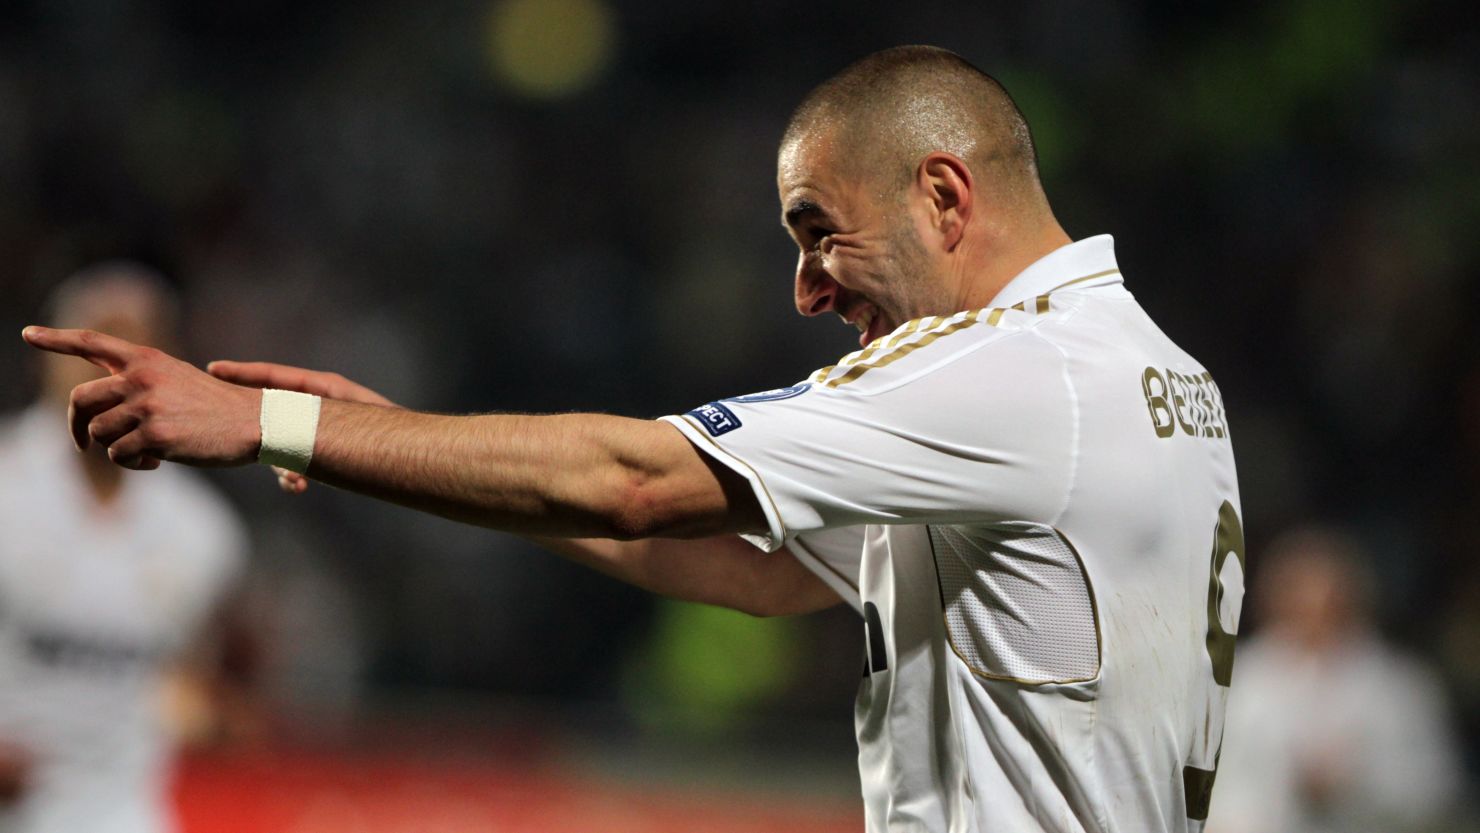 Karim Benzema scored twice for Real Madrid in their comfortable victory in Cyprus.